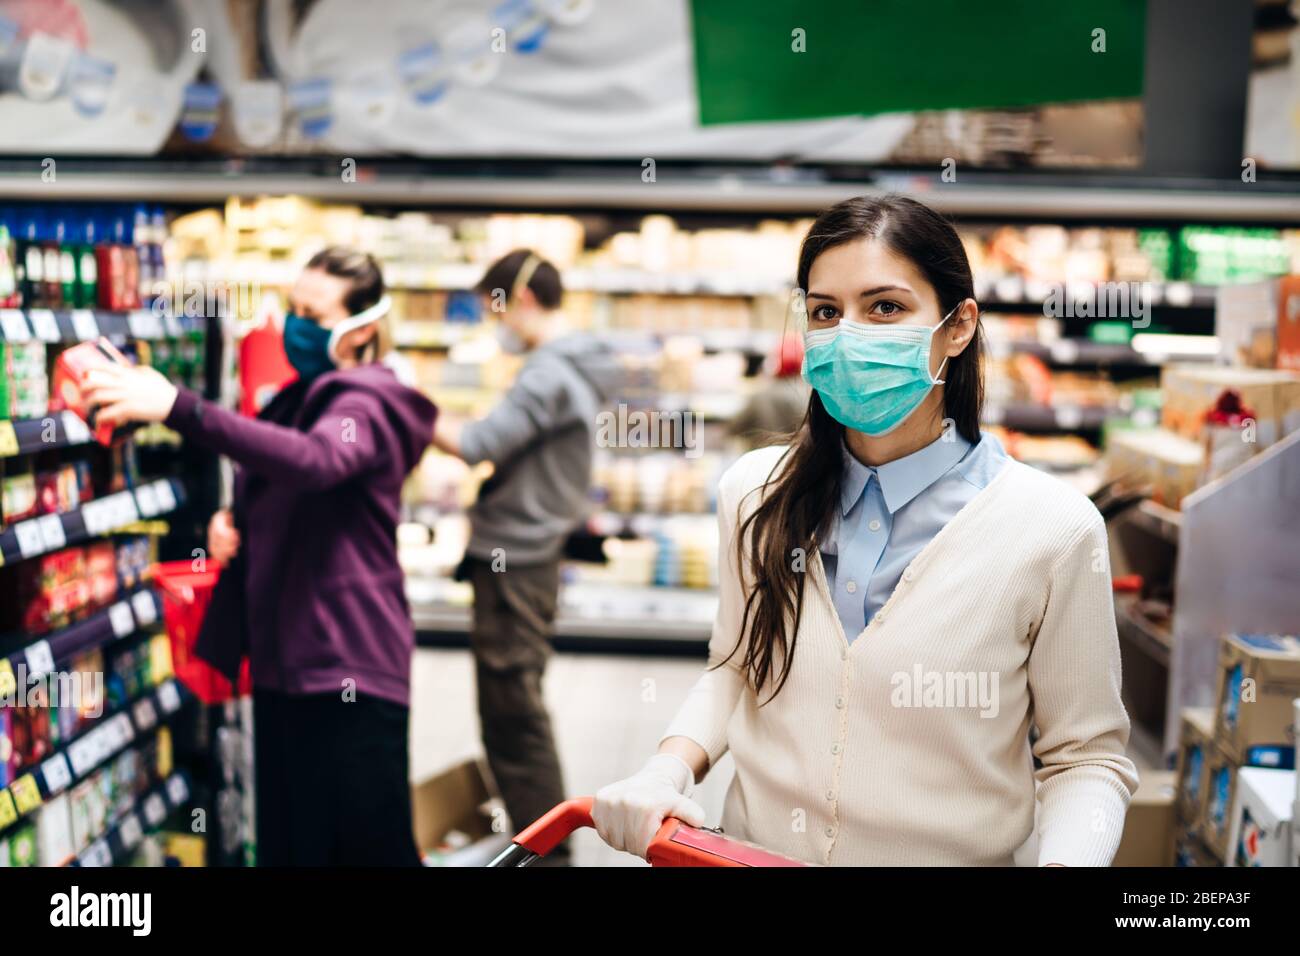 Shopper with mask safely buying for groceries due to coronavirus pandemic in grocery store.COVID-19 shopping.Quarantine preparation.Panic buying and s Stock Photo